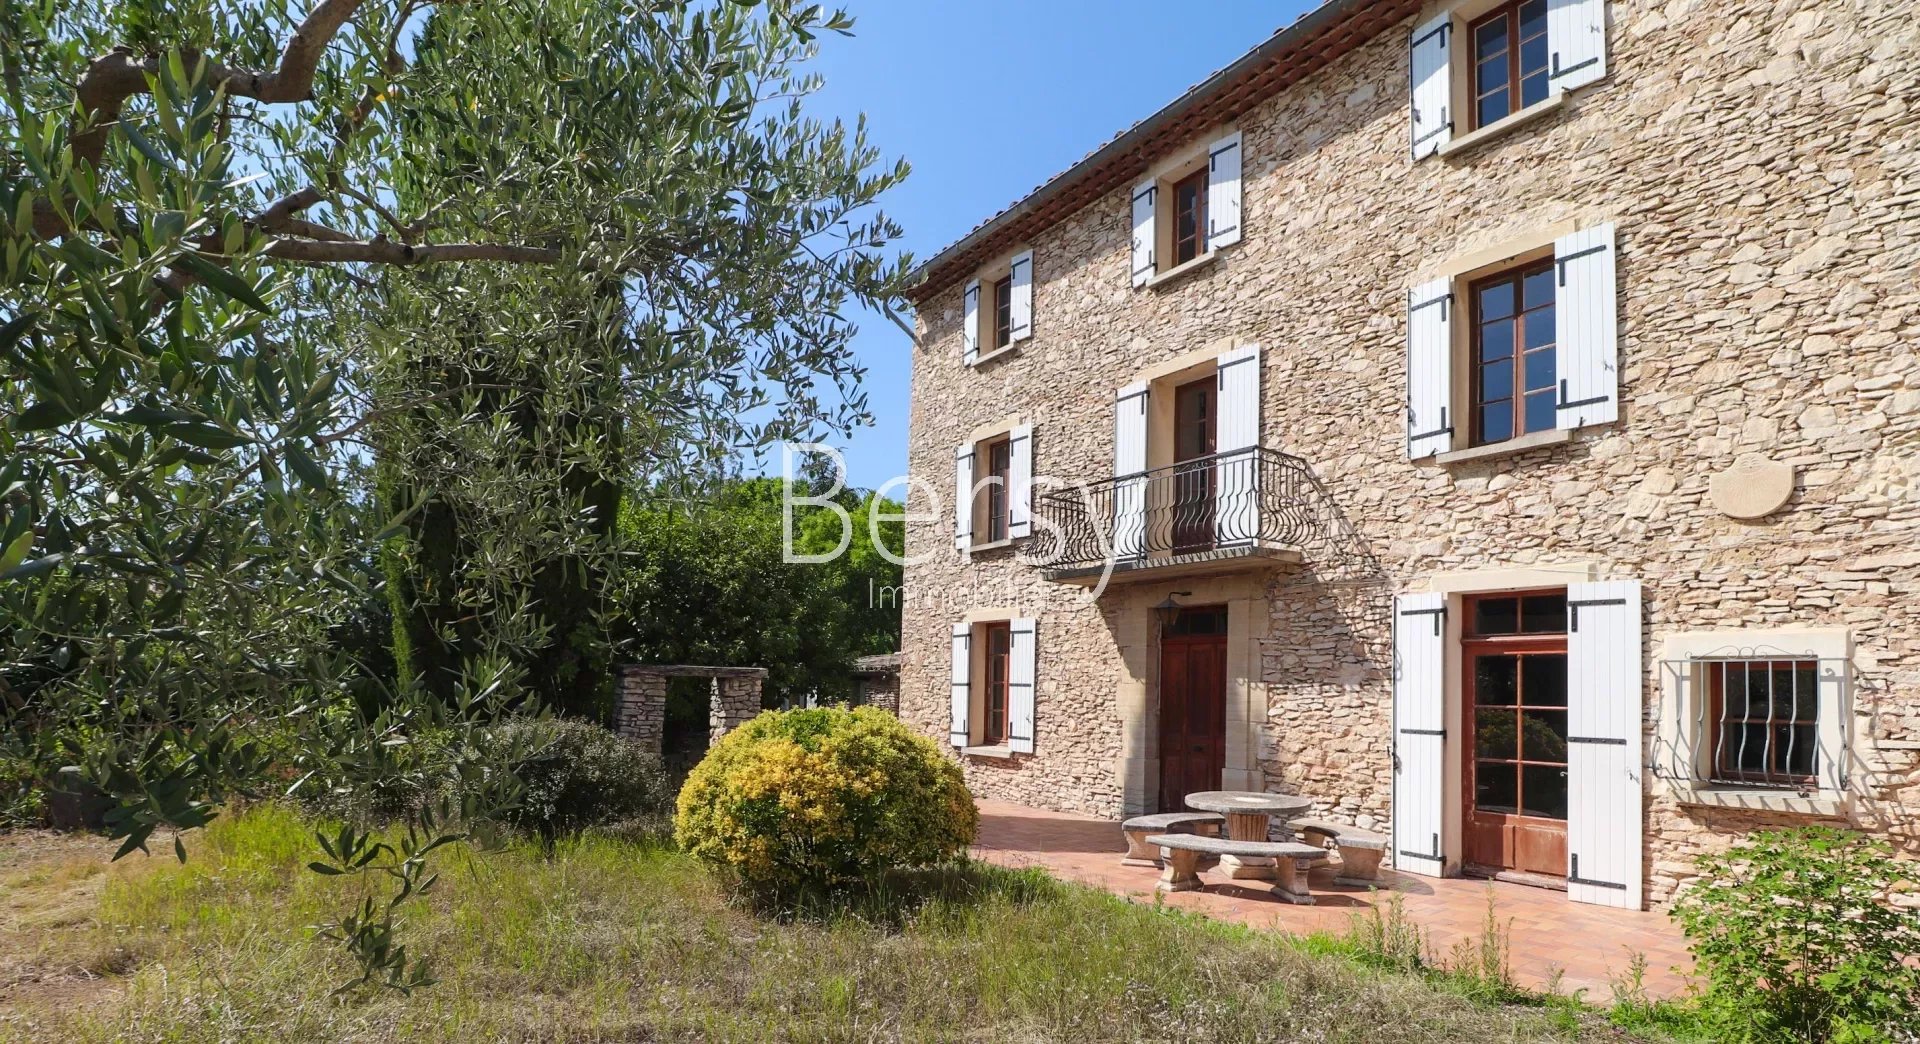 BERSY IMMOBILIER - MAS of stone village and outbuildings - A cocoon in the heart of the village